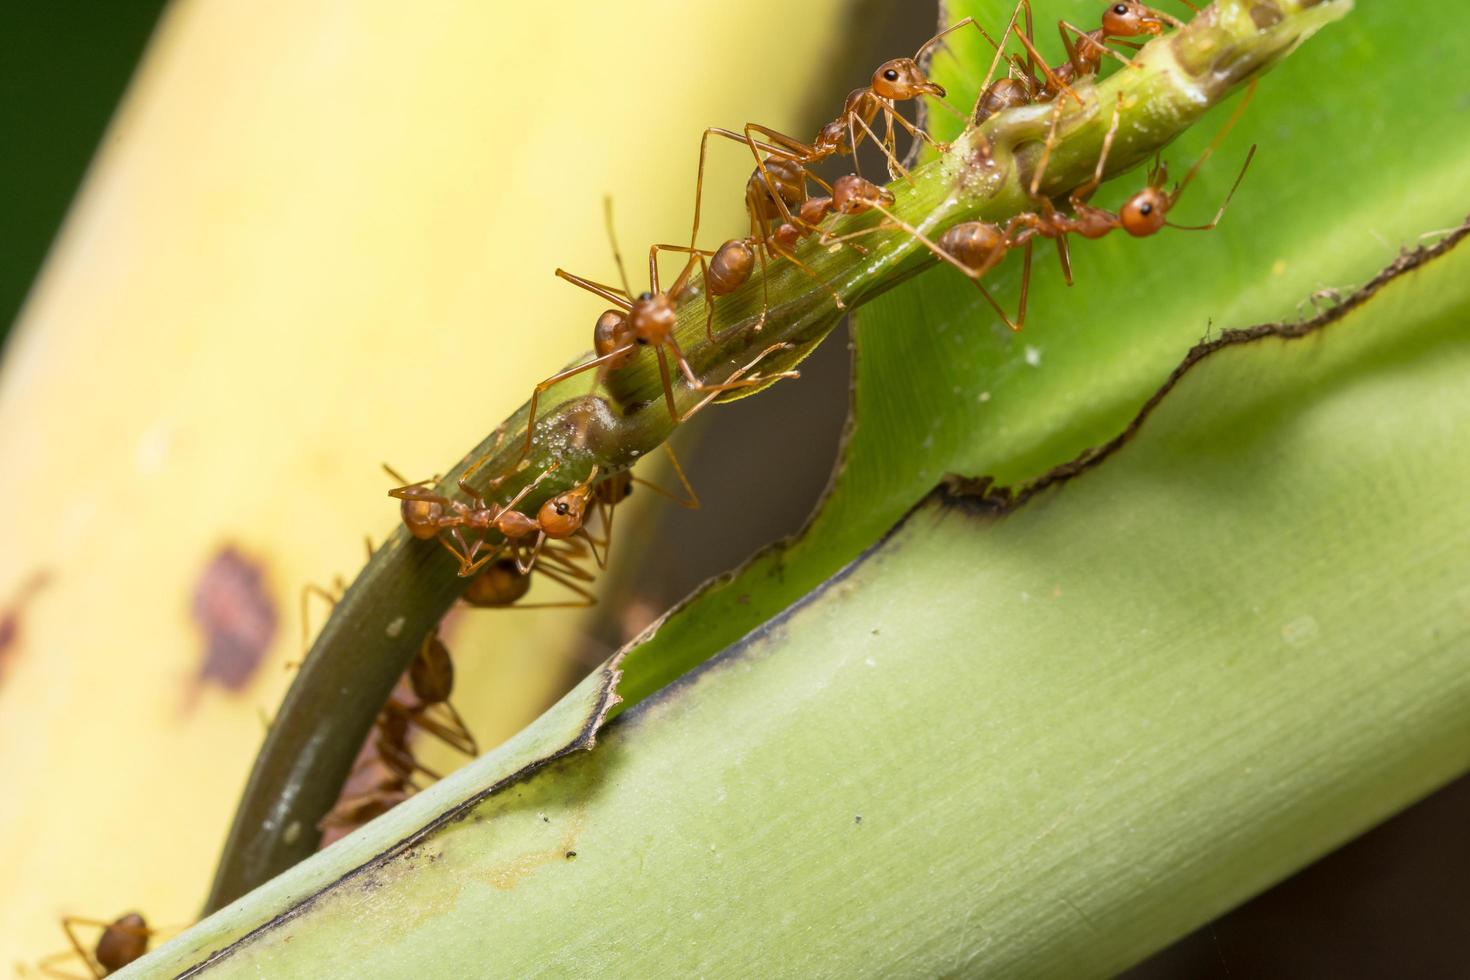 Ants on a plant photo